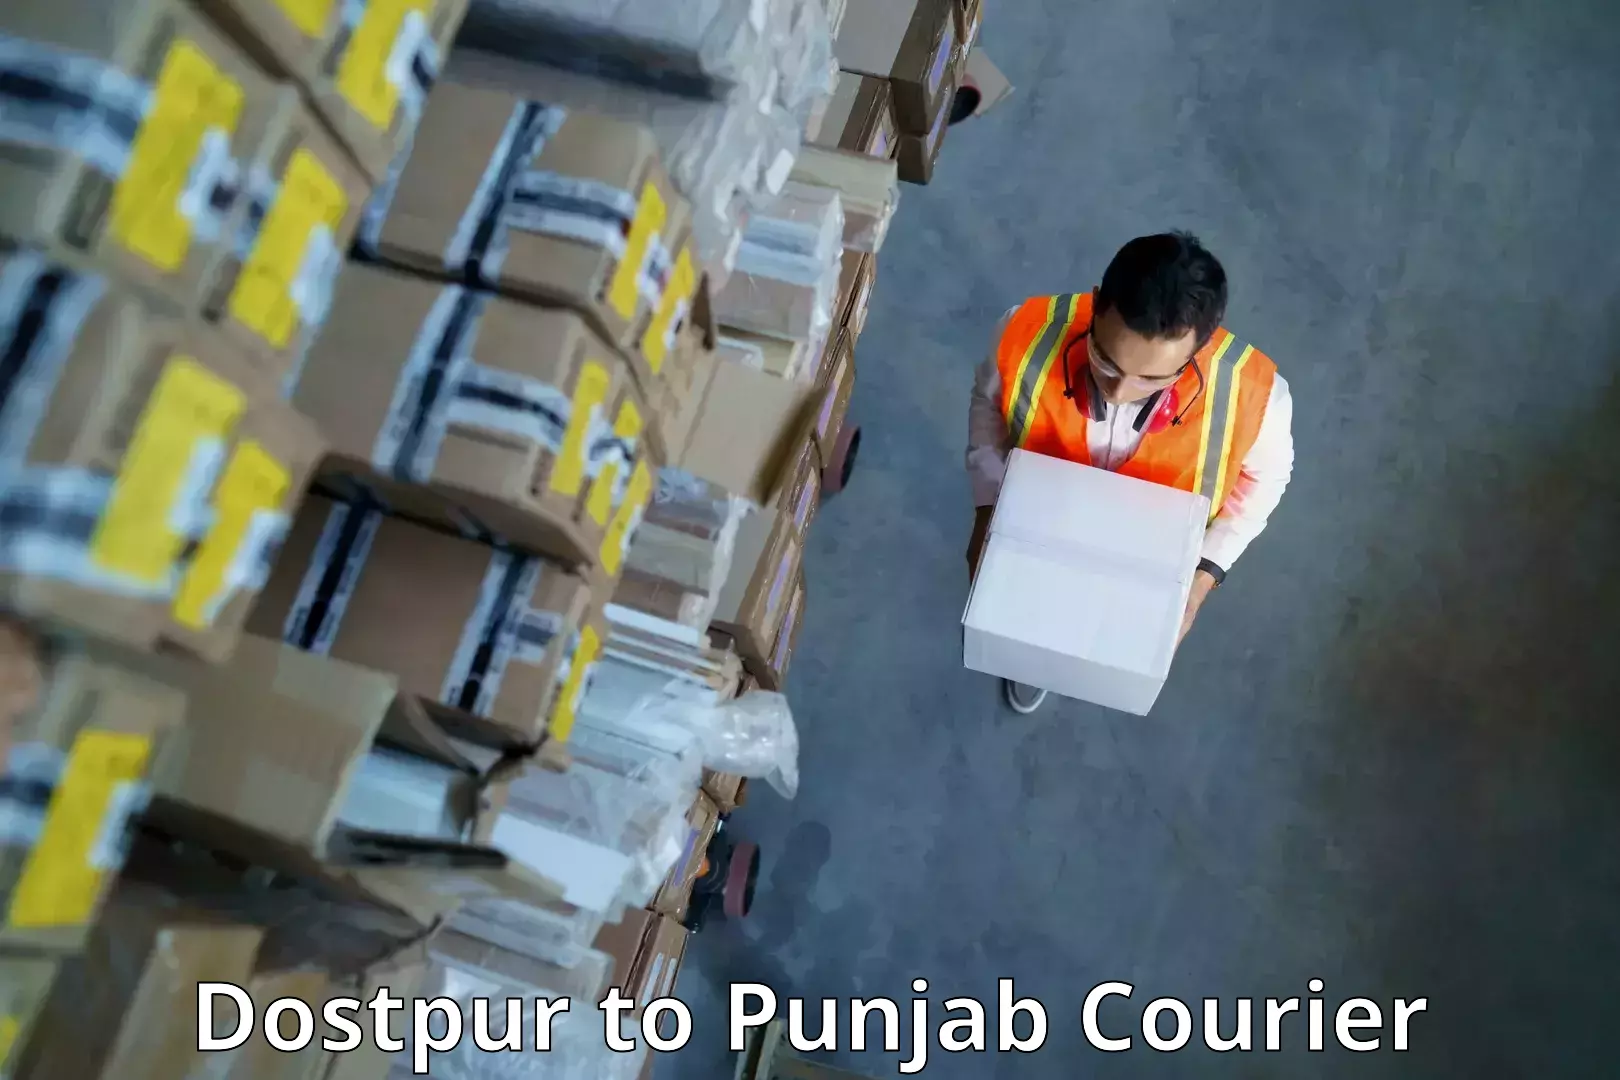 Next-day delivery options Dostpur to Fazilka